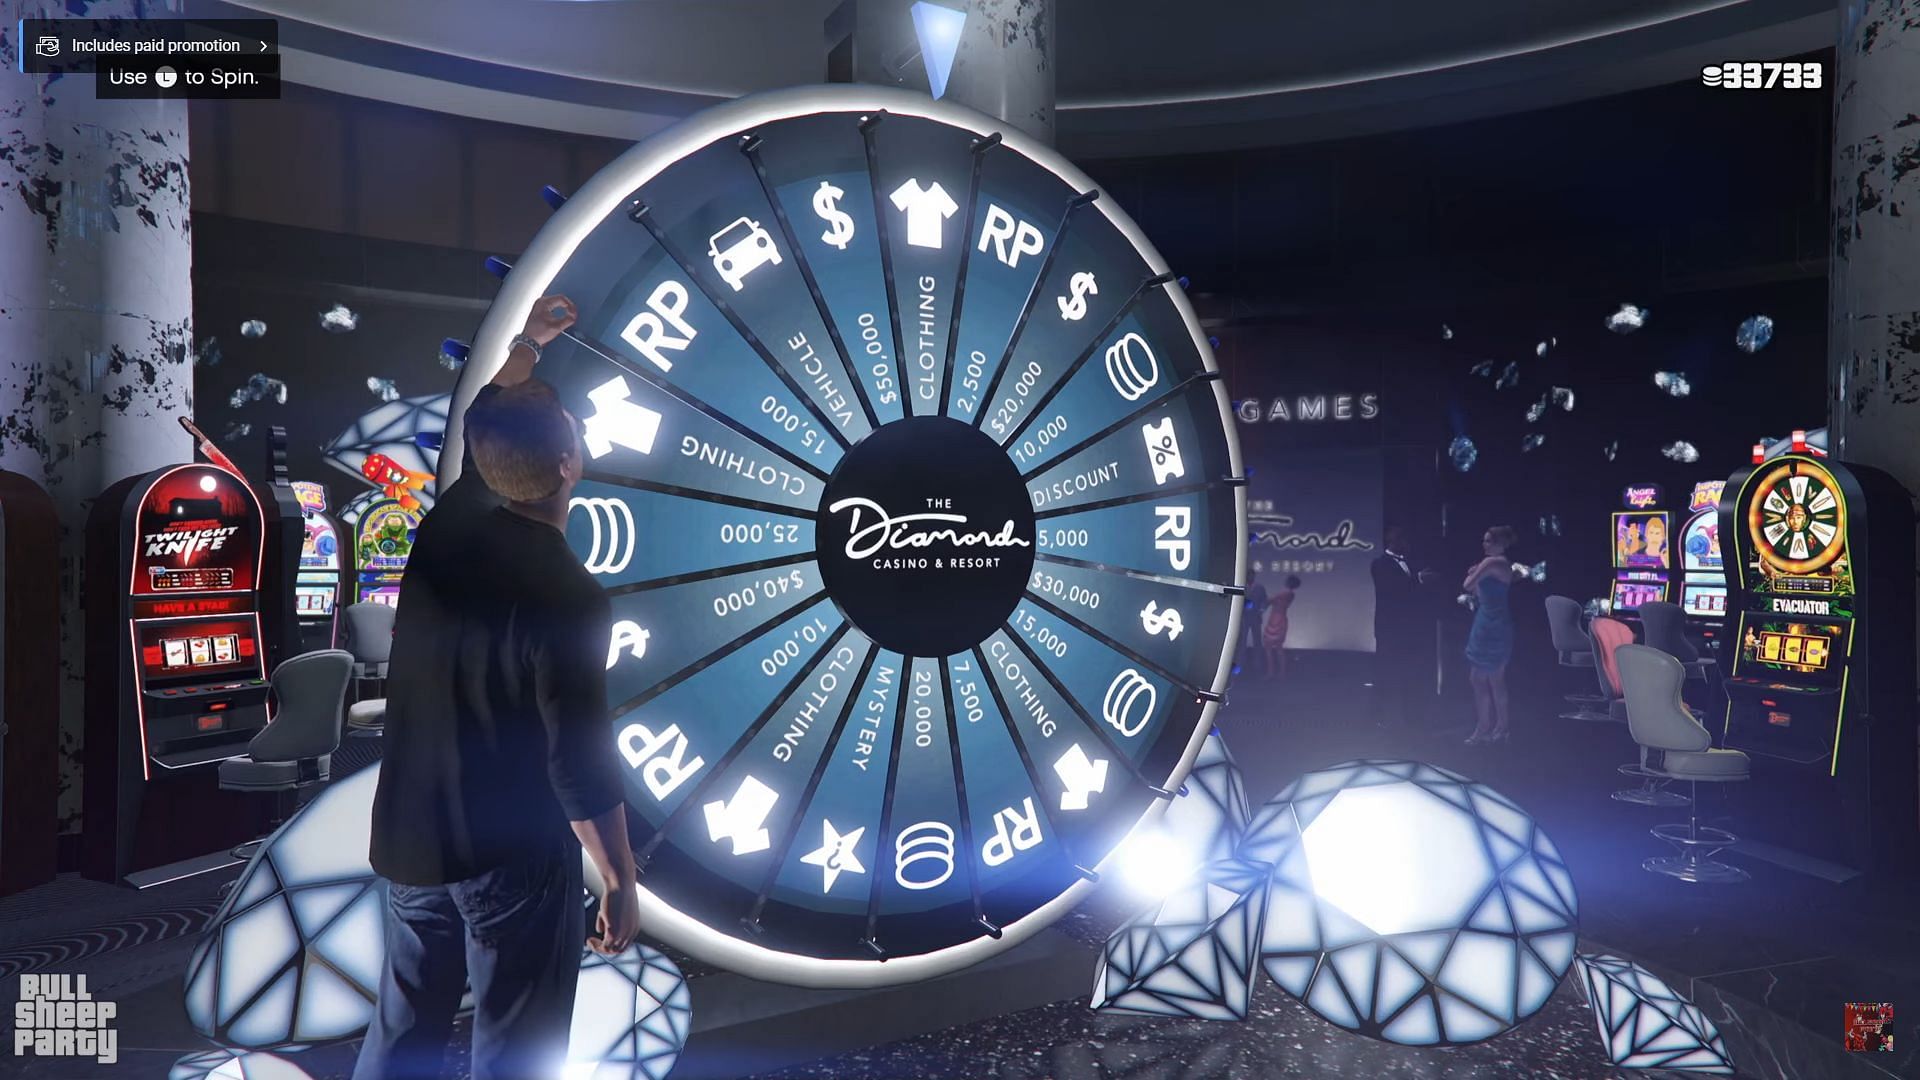 A new trick allows GTA Online players to win podium car every time (Image via BullSheepParty)